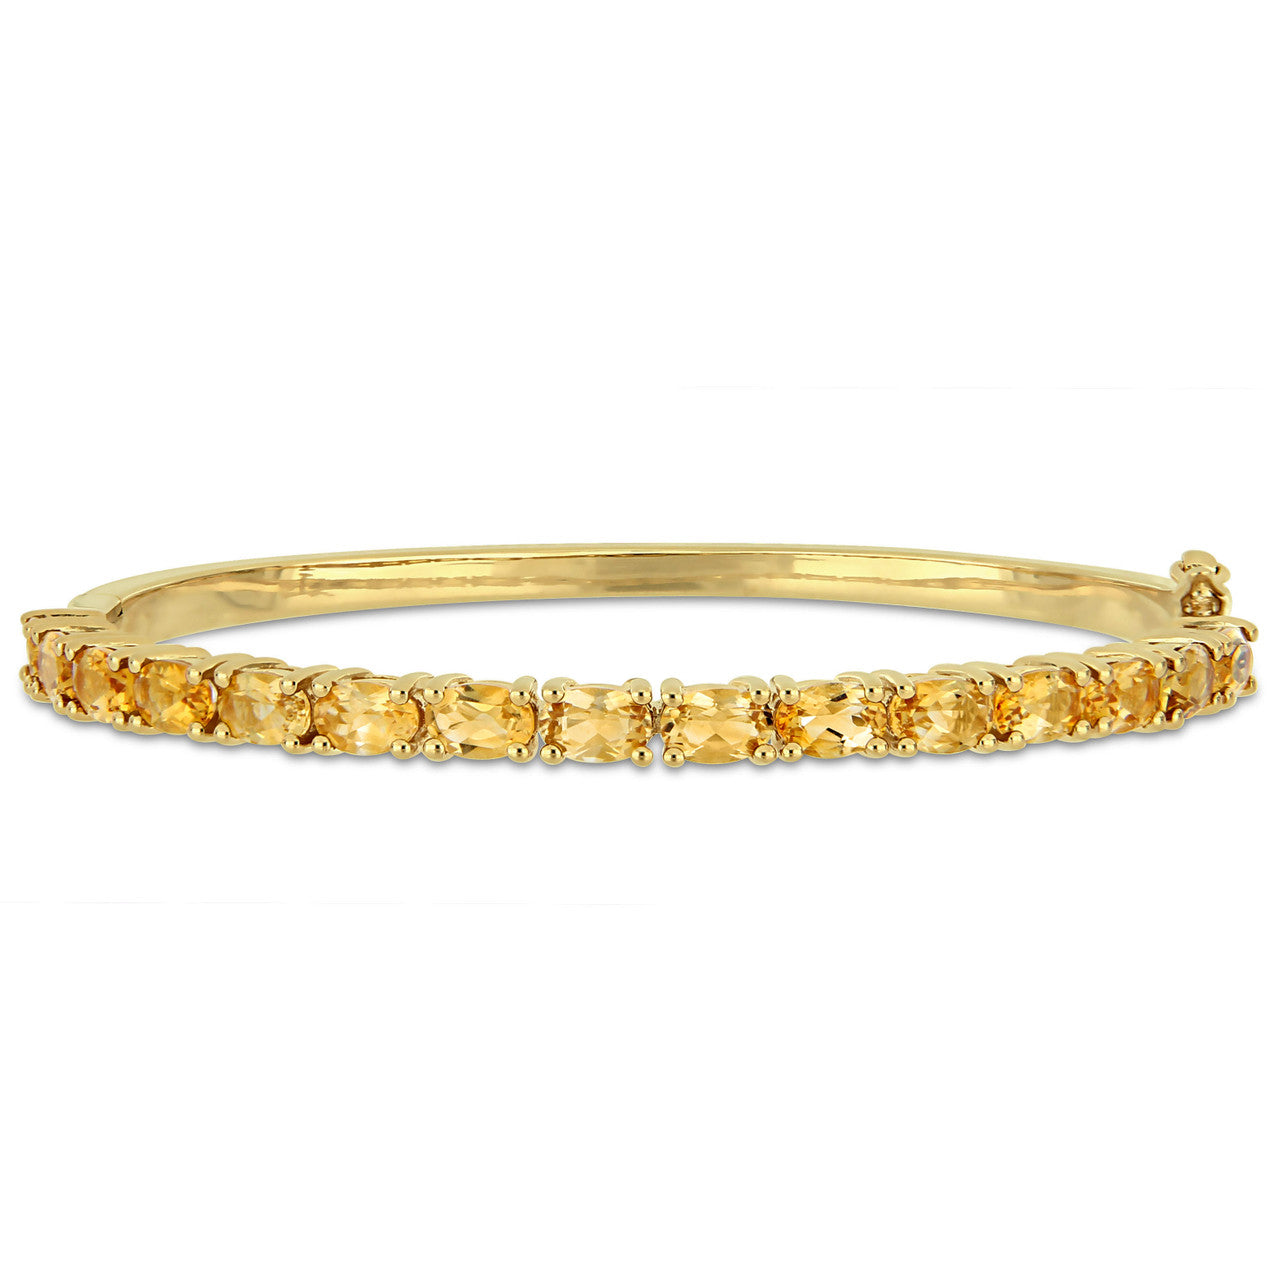 Ice Jewellery 6-3/4 CT TGW Oval-Cut Citrine Bangle In Yellow Plated Sterling Silver - 75000004282 | Ice Jewellery Australia